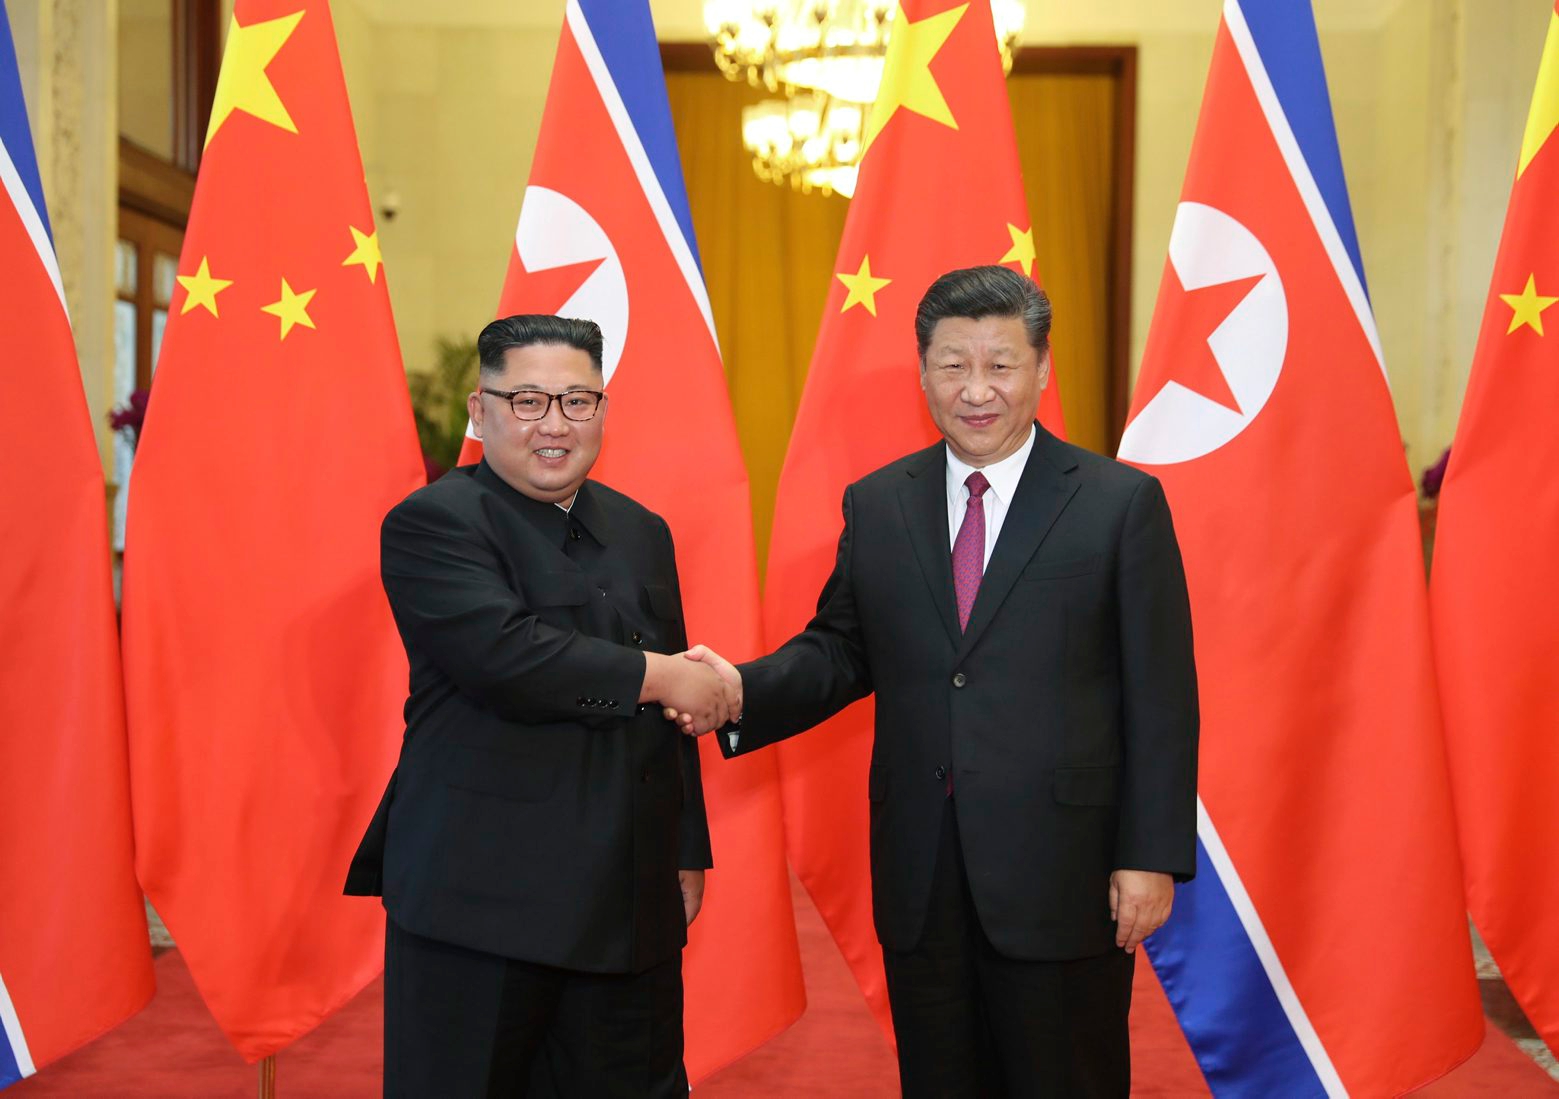 FILE - In this June 19, 2018, file photo released by China's Xinhua News Agency, Chinese President Xi Jinping, right, poses with North Korean leader Kim Jong Un for a photo during a welcome ceremony at the Great Hall of the People in Beijing. Chinese state media say President Xi Jinping will make a state visit to North Korea this week. State broadcaster CCTV said in its evening news program on Monday that Xi will meet with North Korean leader Kim Jong Un during a visit Thursday and Friday. (Ju Peng/Xinhua via AP, File) China North Korea Summit